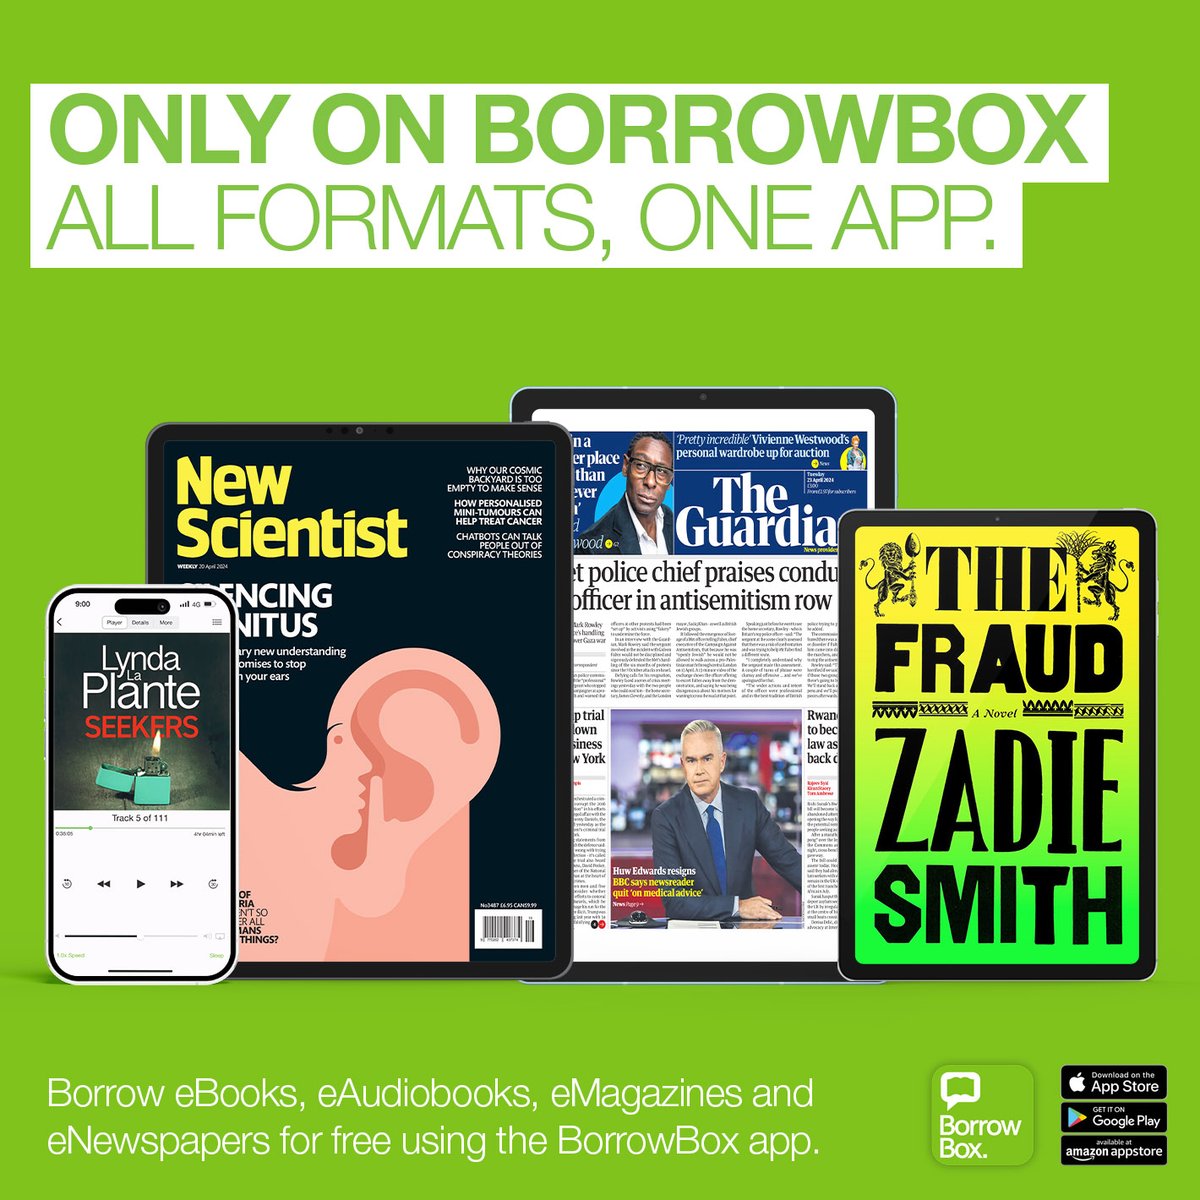 Magazines and Newspapers are now available through #Borrowbox. Select the ePress tab at the bottom of the screen to browse the selection of titles on offer.

Libby and Pressreader are no longer available to library users.